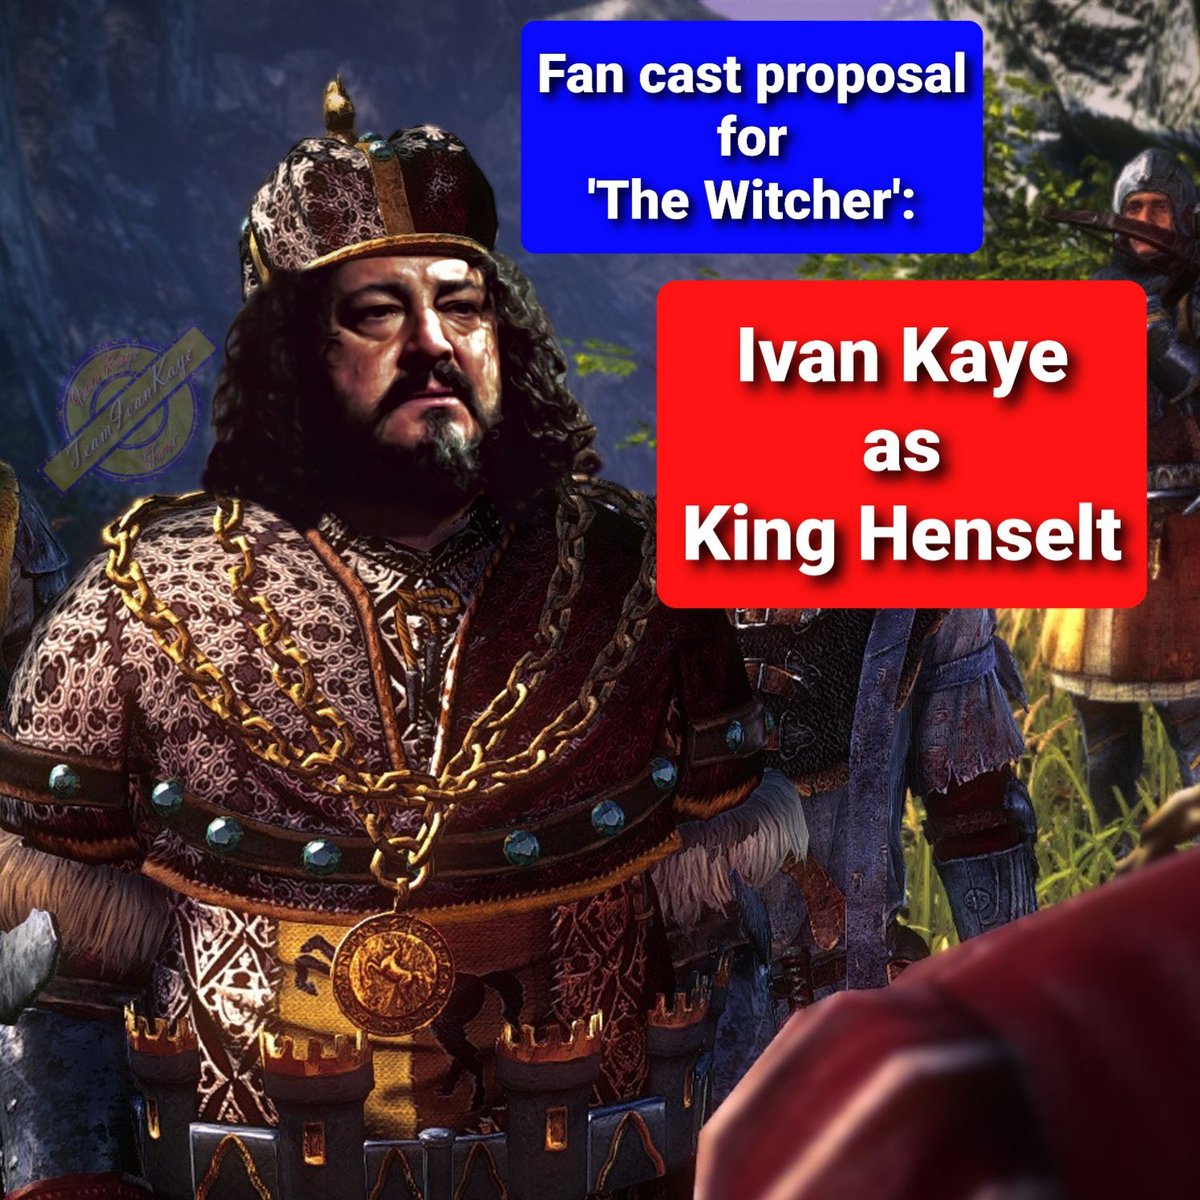 Just a reminder that Ivan is on several fan cast lists for #TheWitcher on IMDb as King Henselt & I might've seen him suggested for the role elsewhere. The fans see him mainly as a king, a warrior and/or a menacing (Bond) antagonist. *wink to entertainment industry*
.
#IvanKaye